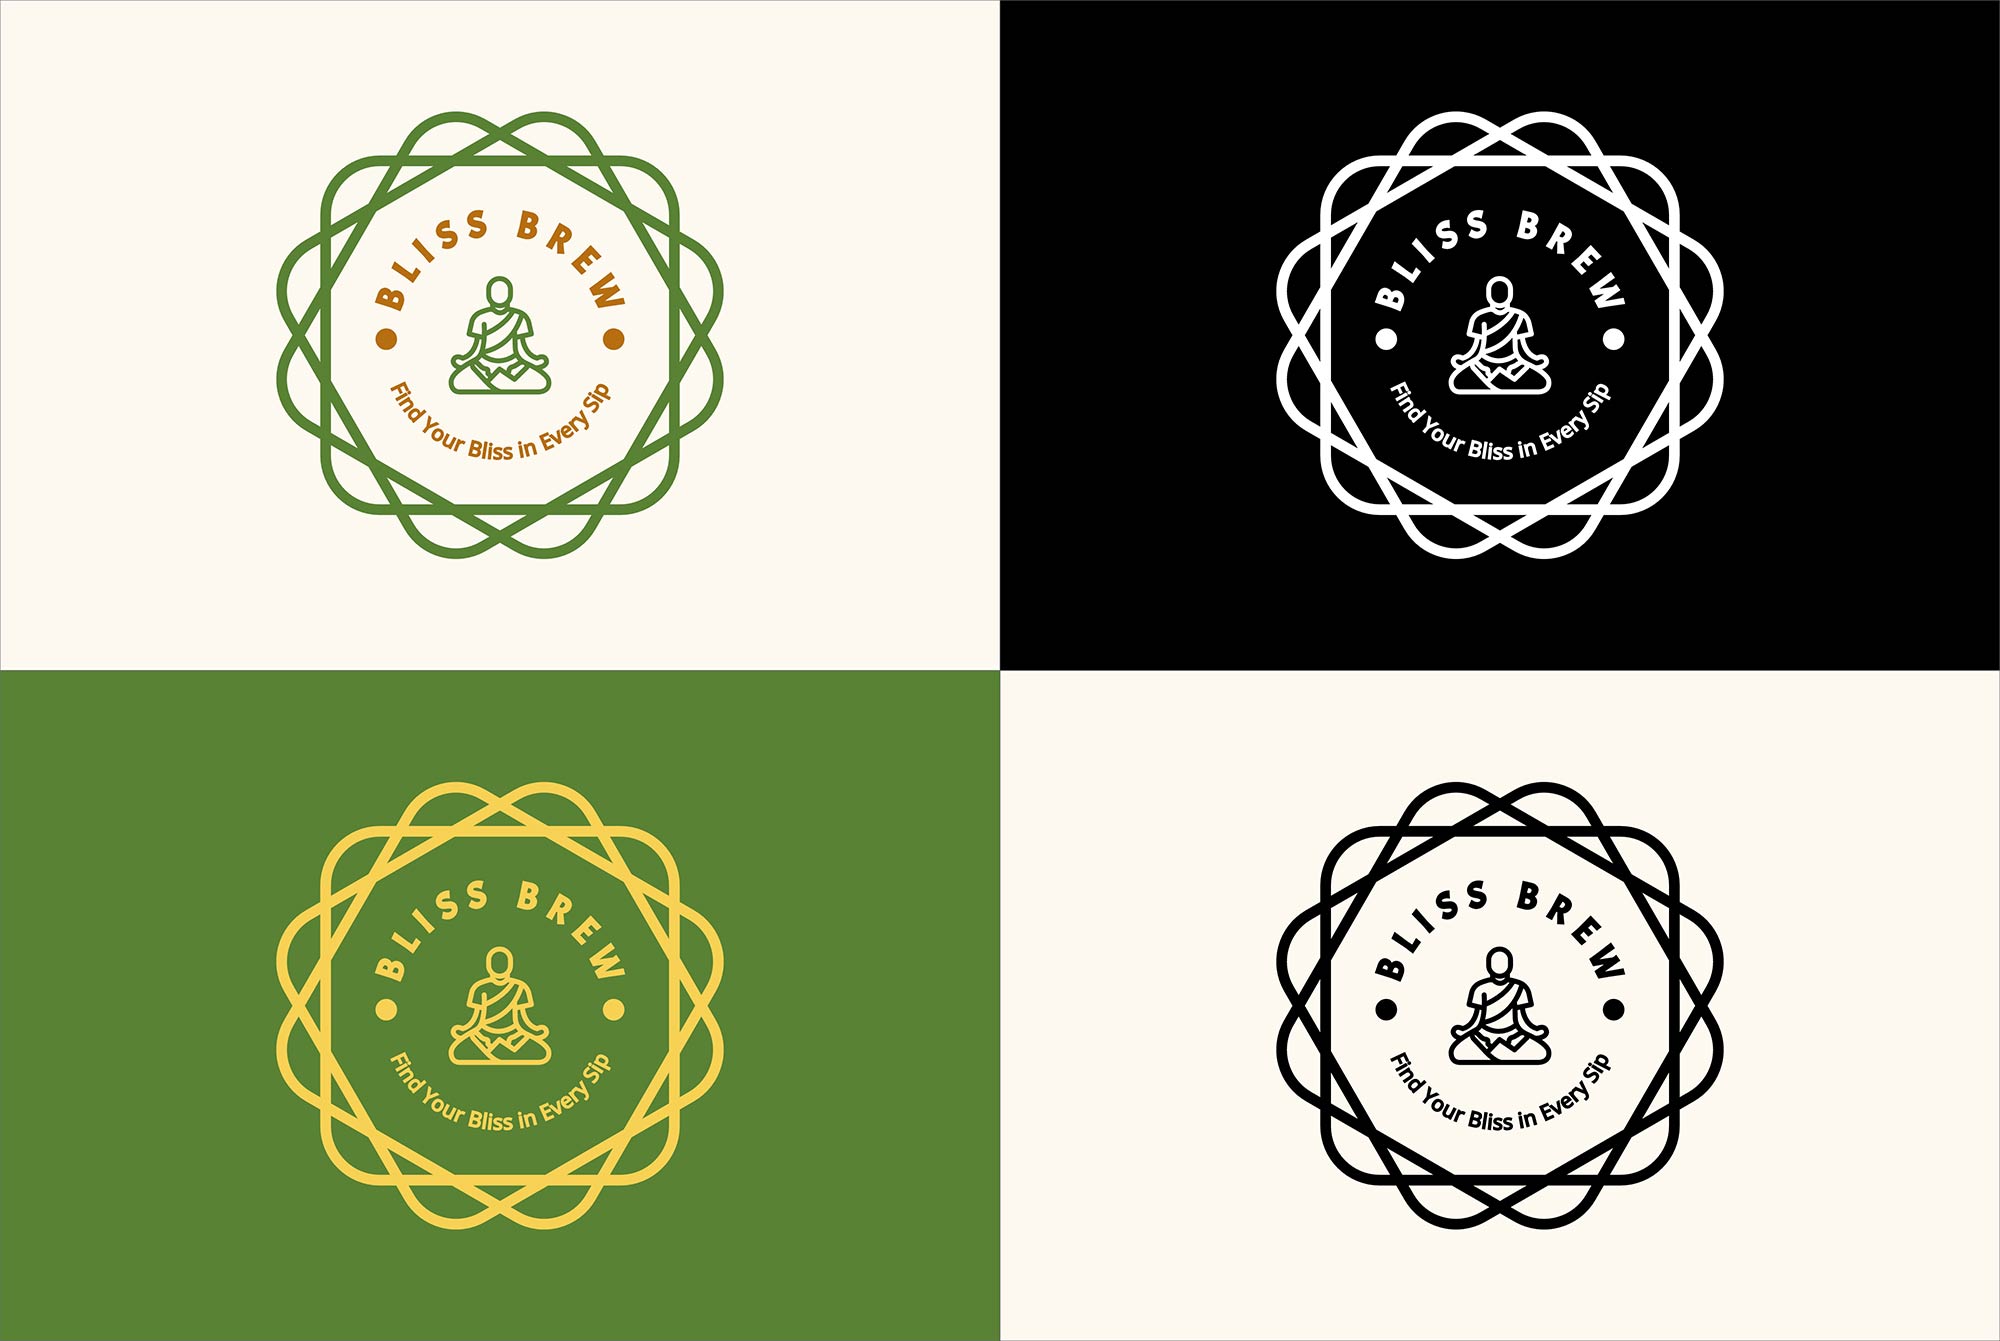 four different colored versions of the same logo.